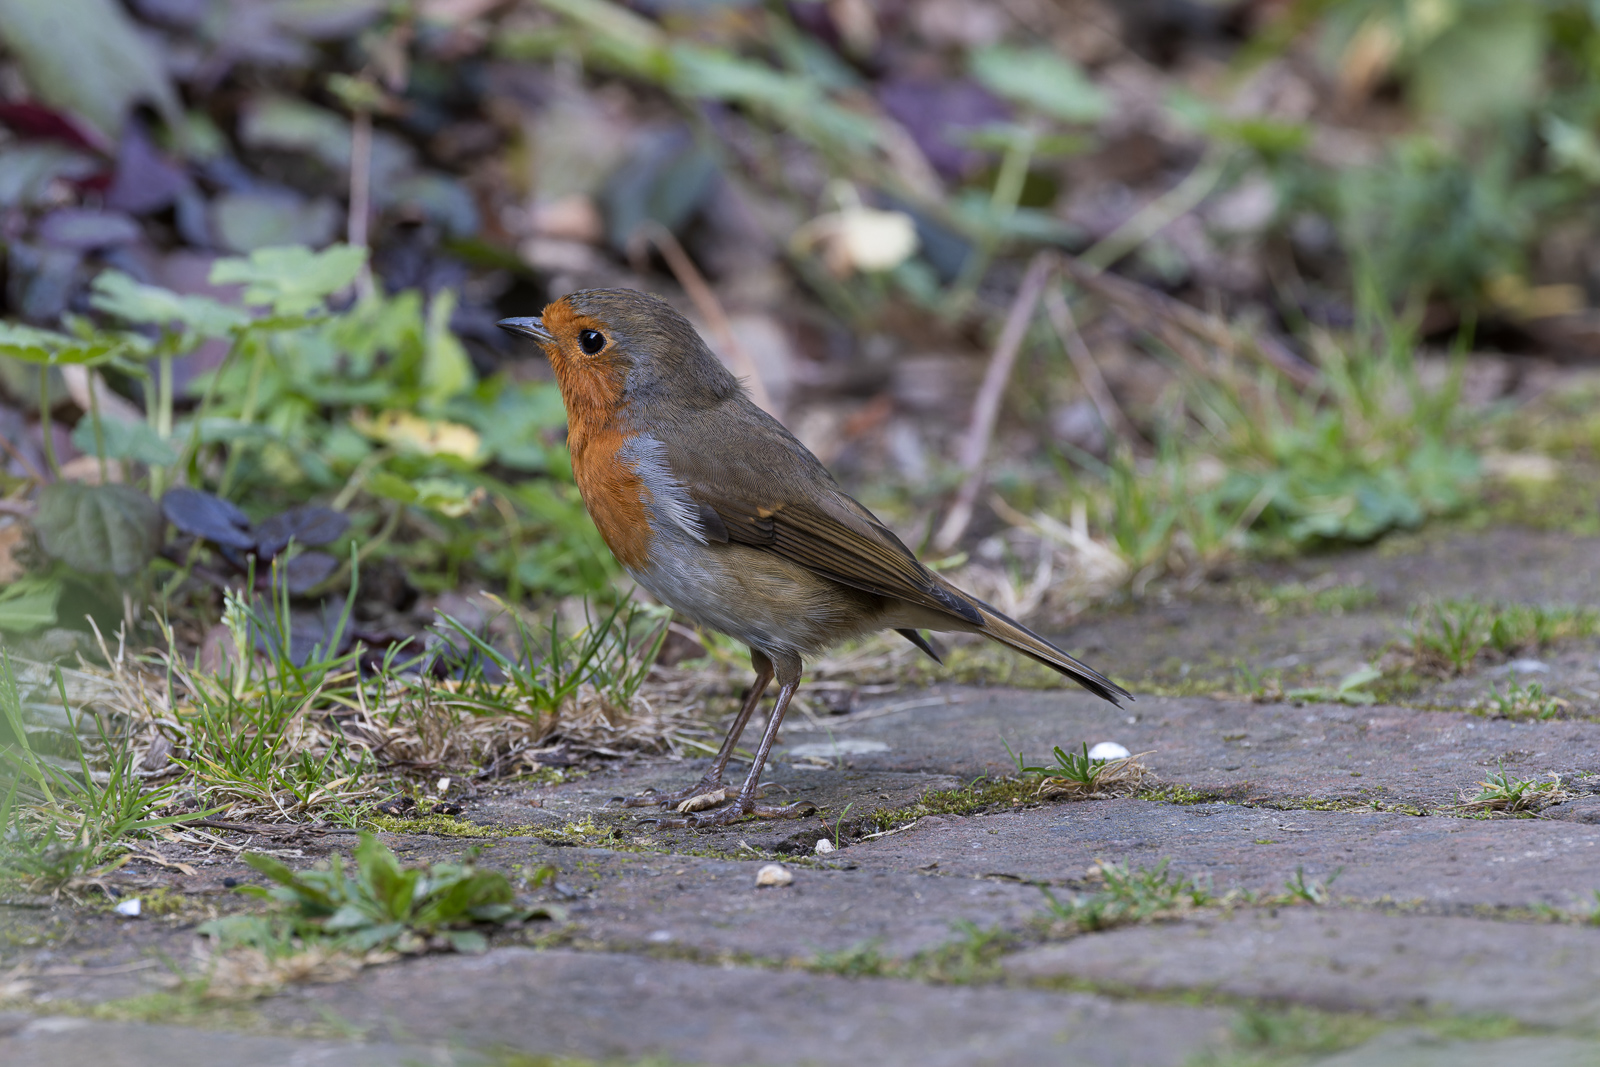 Bobbin’ Robin captured with the RF 100-500mm lens at 500mm. Camera settings: 1/500sec. f/7.1 ISO 3200